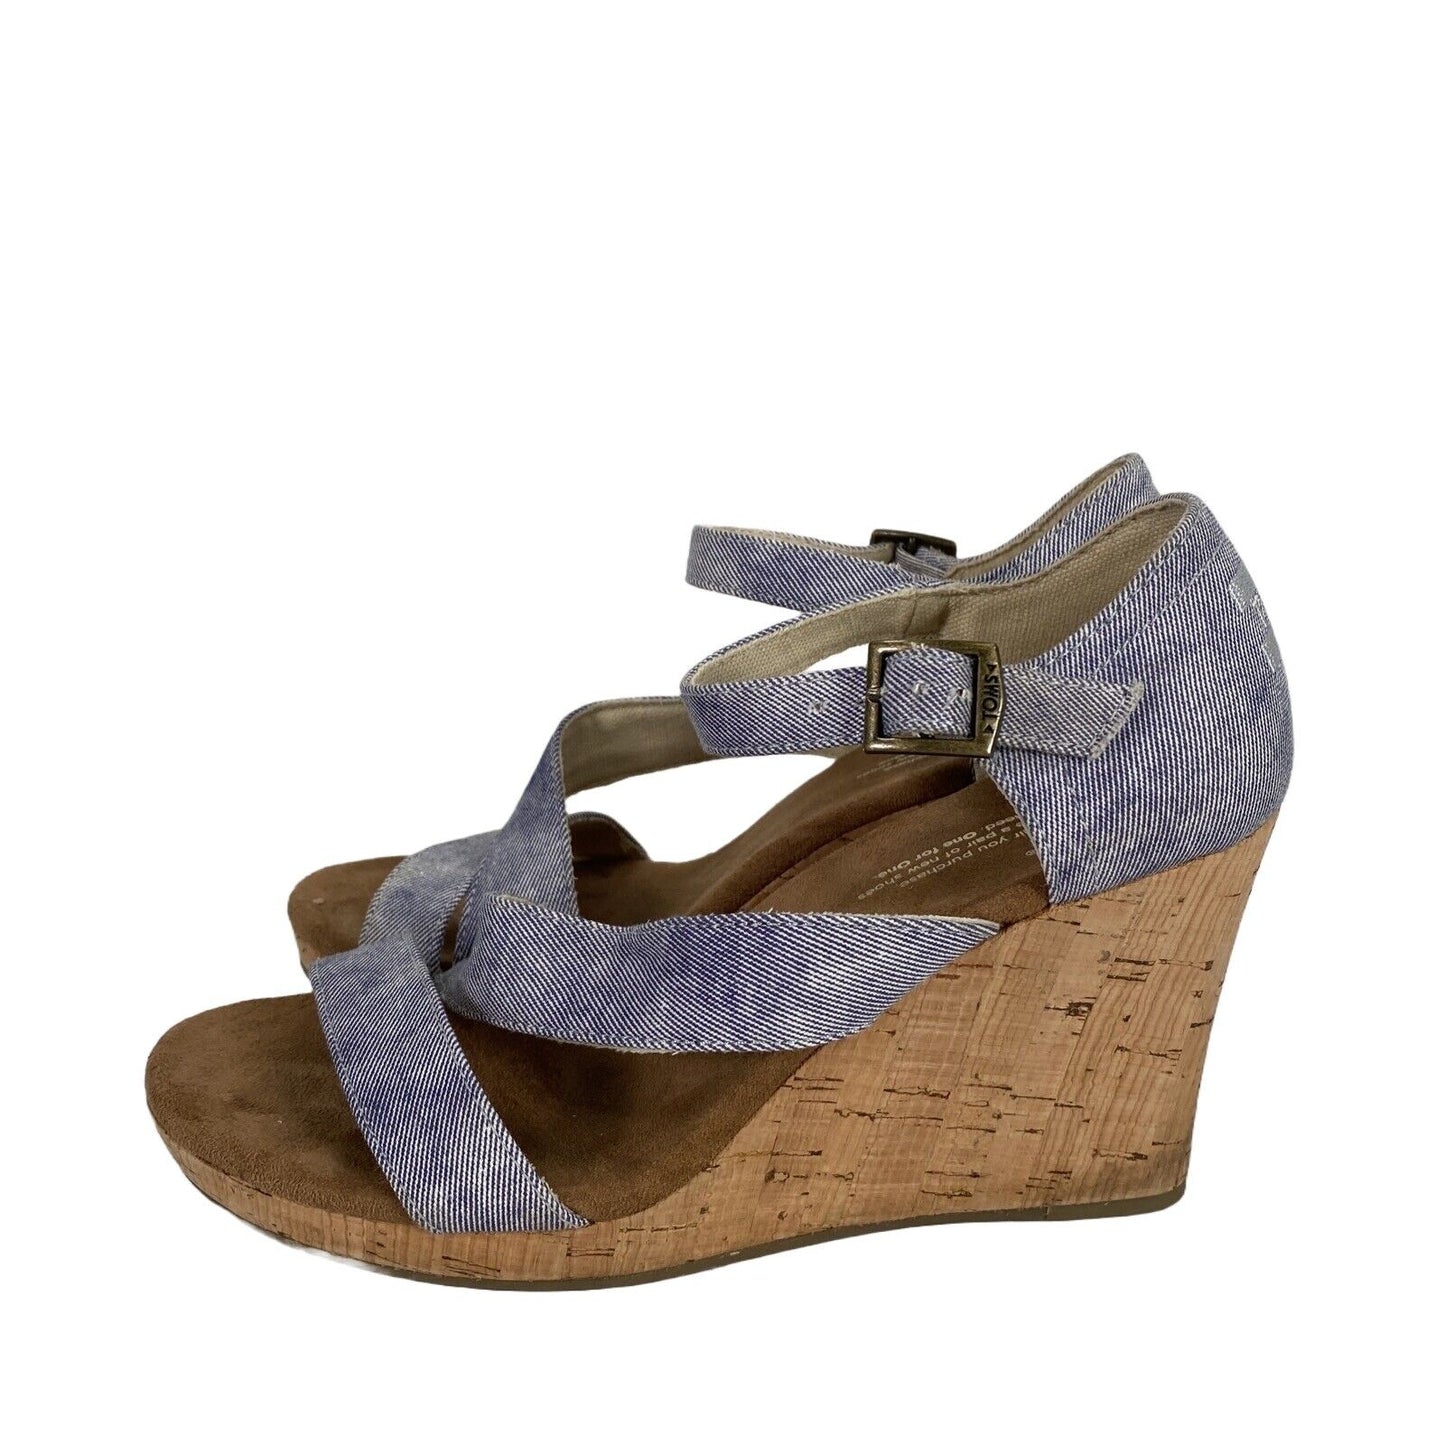 Toms Women's Blue Fabric Mary Jane Cork Wedge Sandals - 8